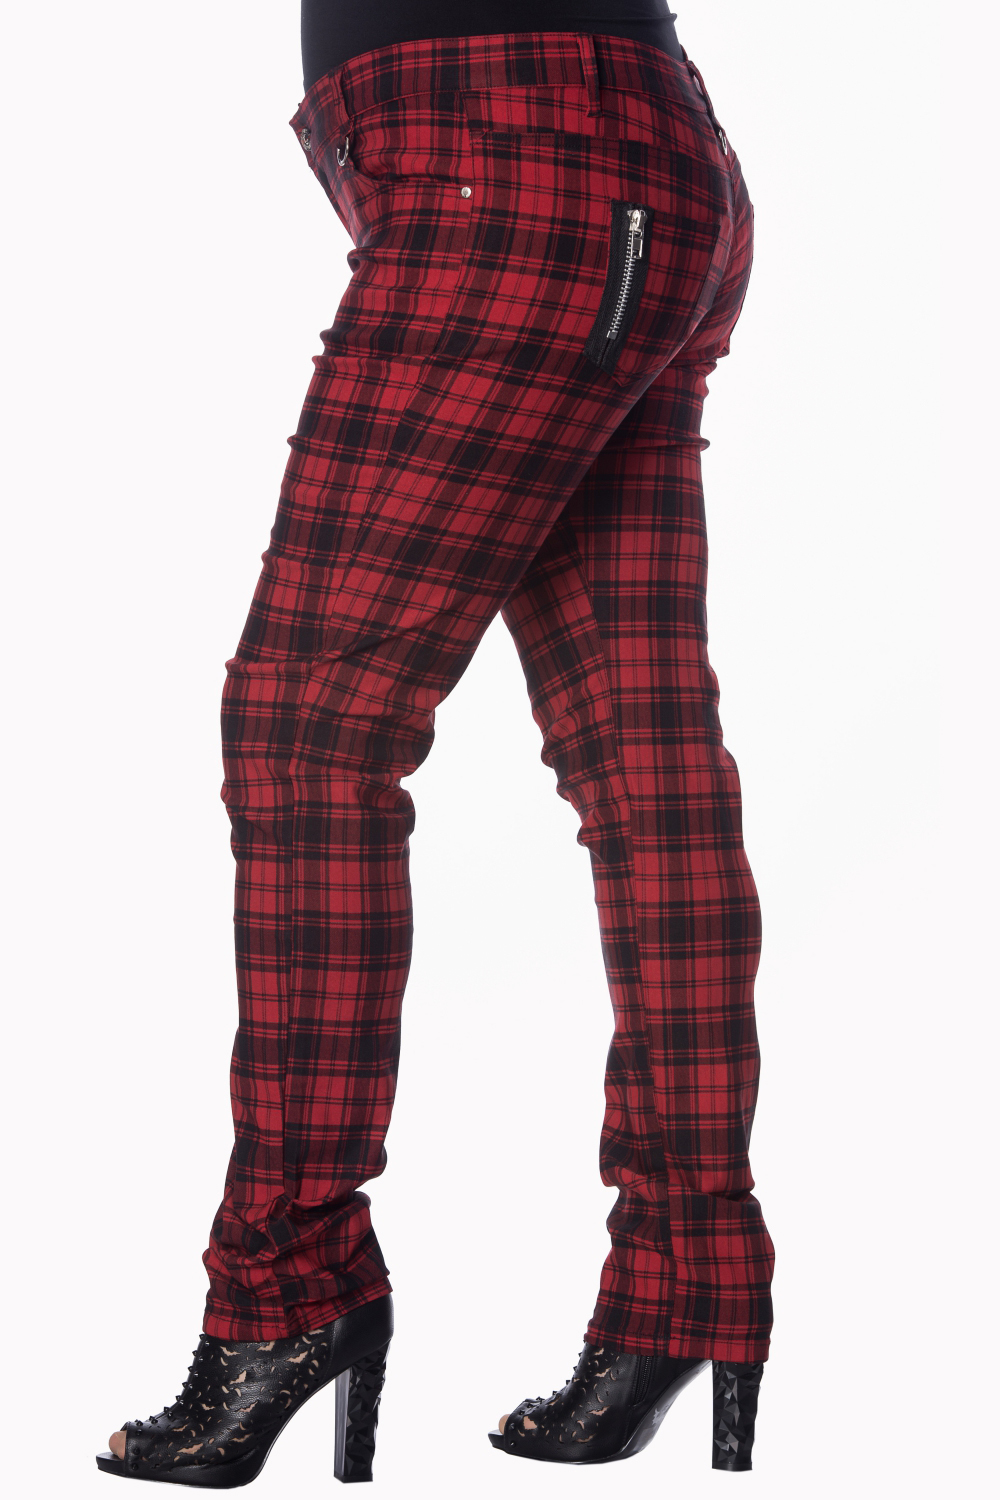 Plus Size Red Checked Skinny Jeans by Banned Apparel